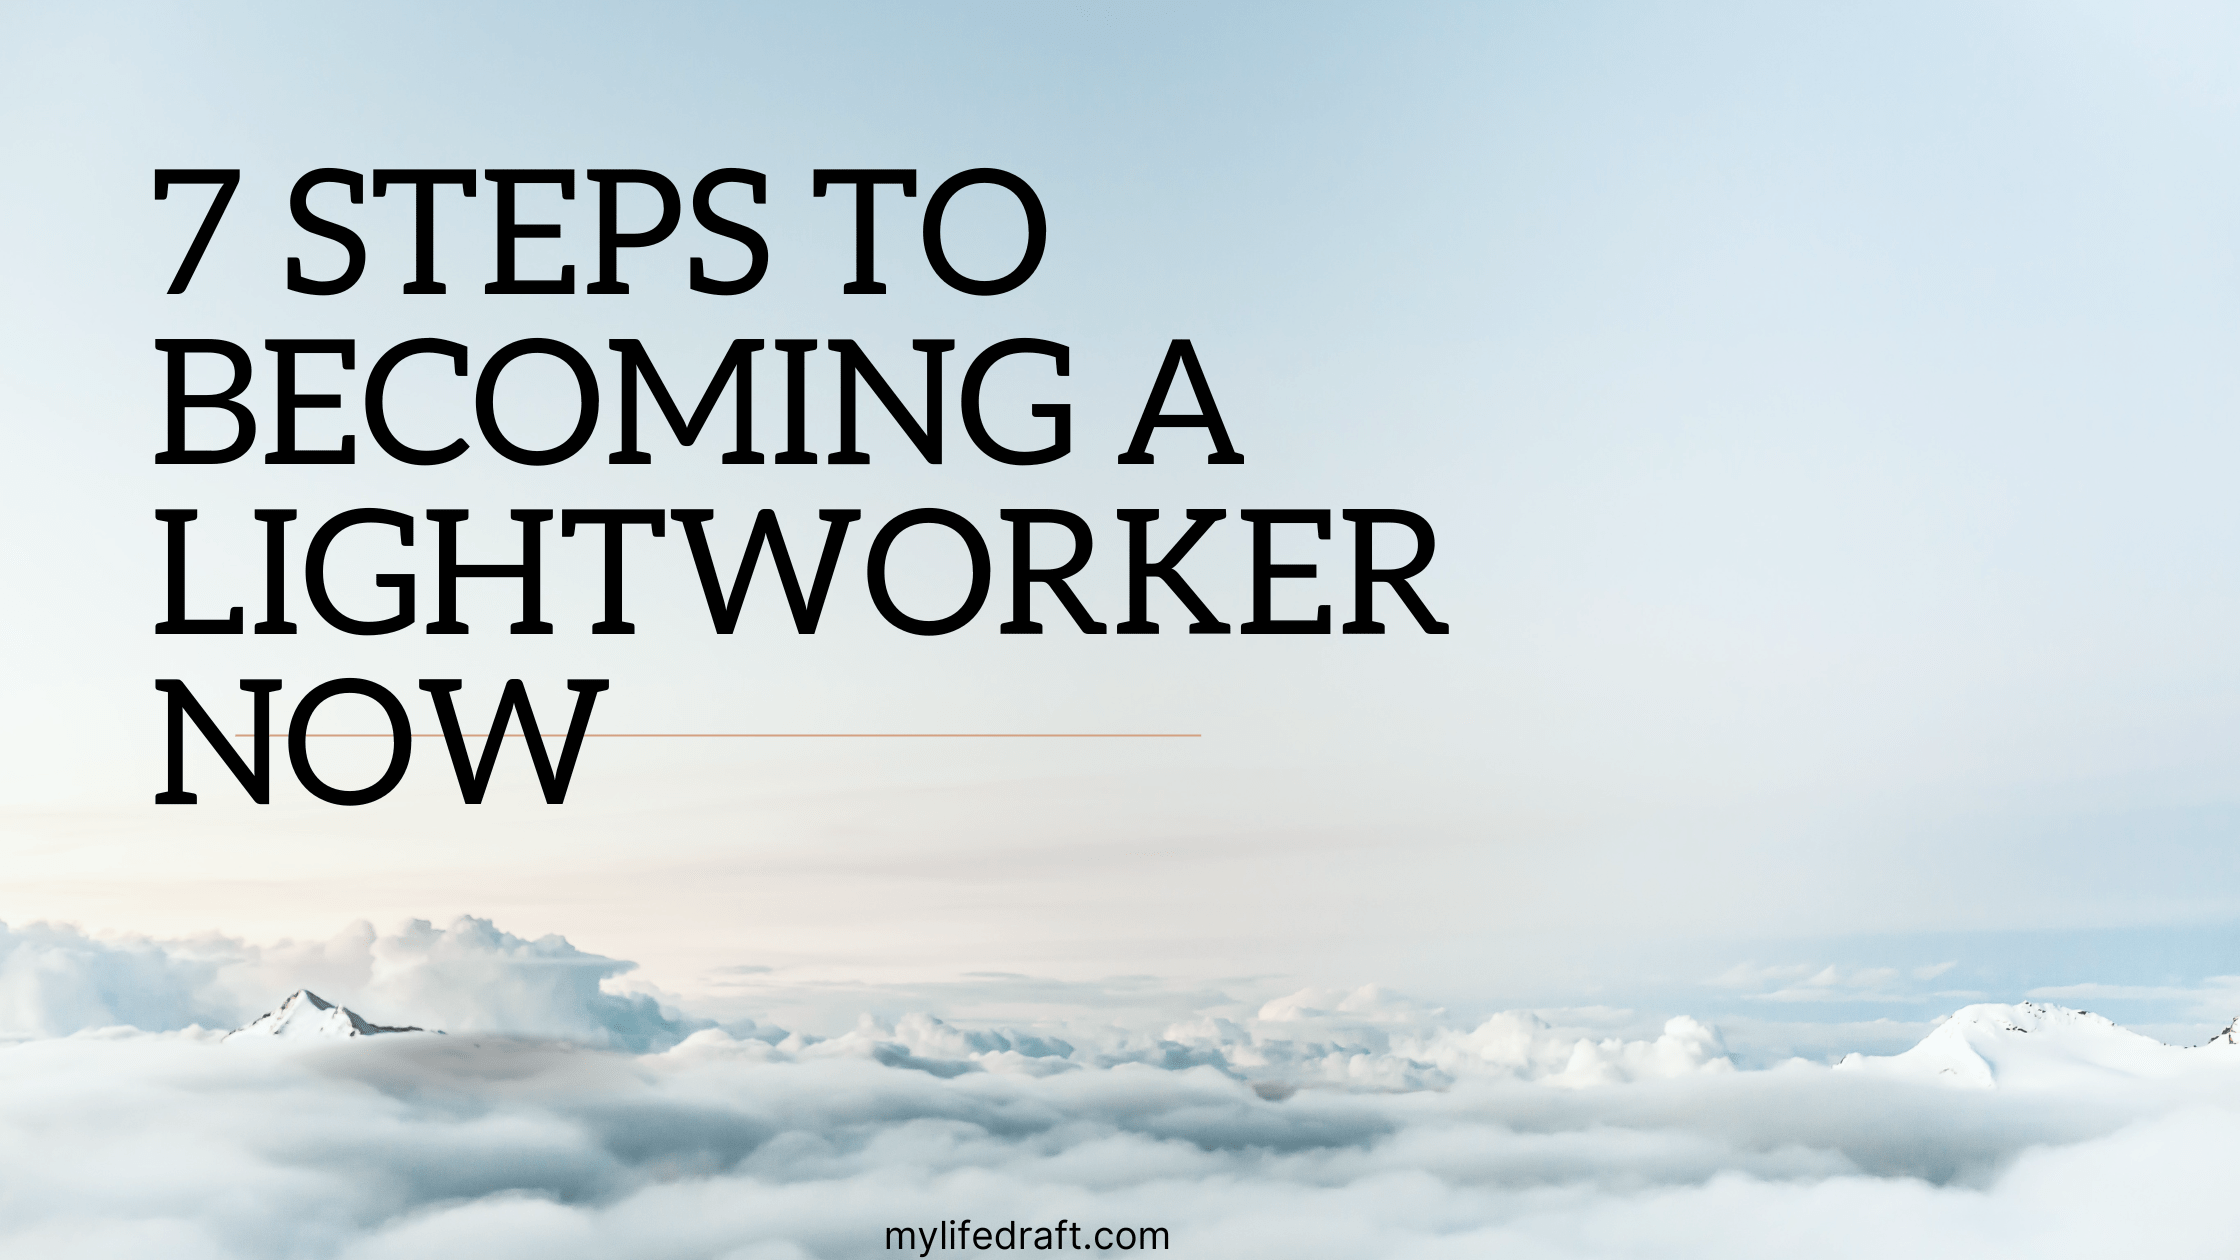 7 Steps To Becoming A Lightworker Now